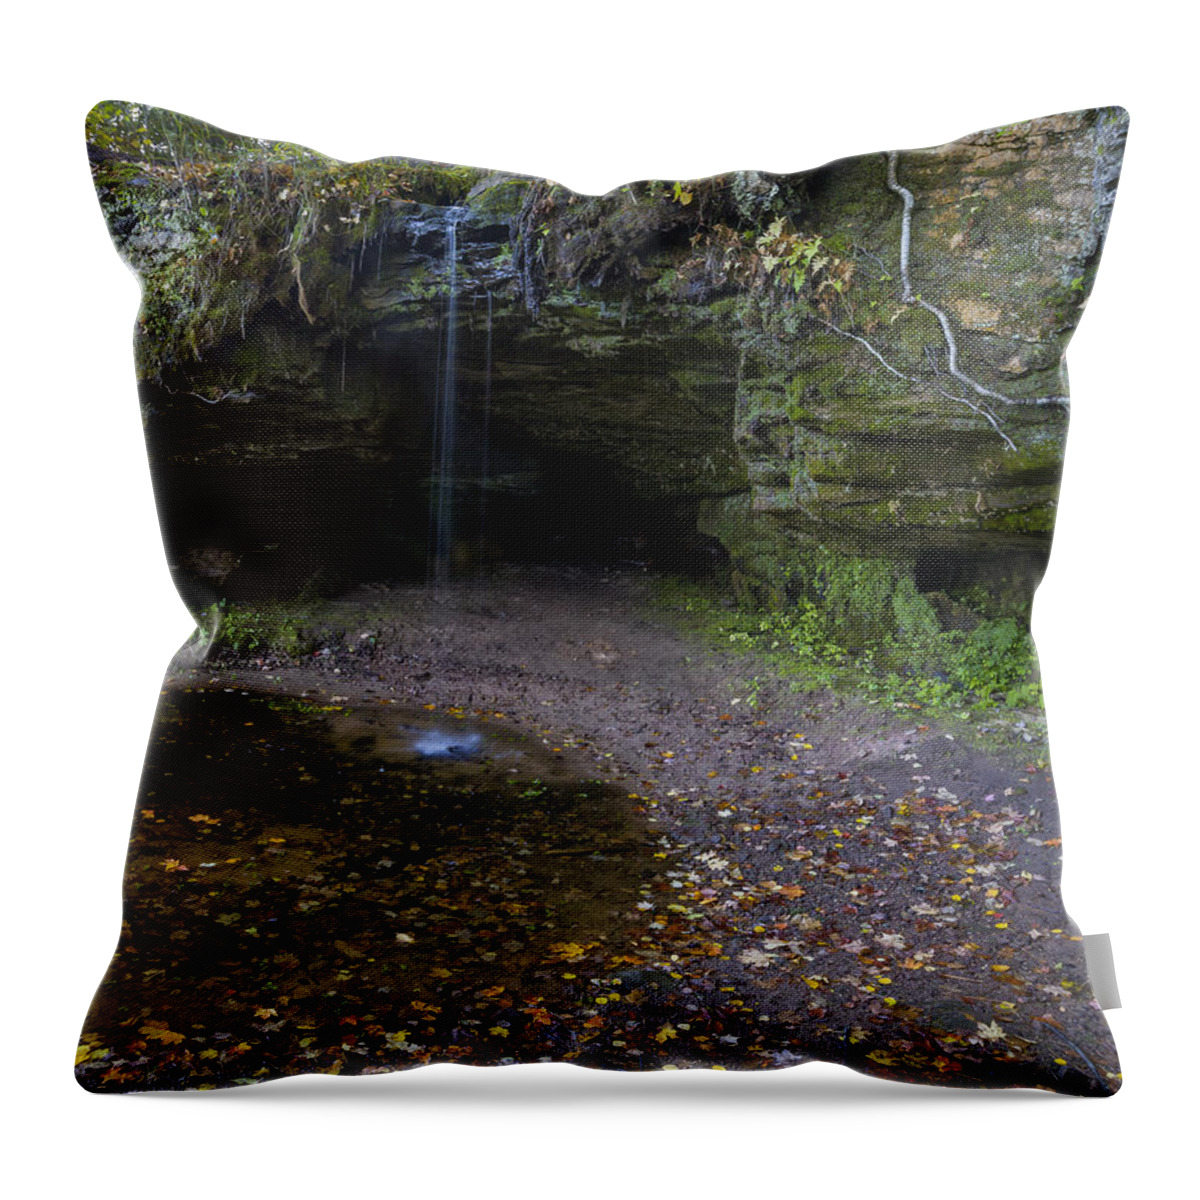 Autumn Throw Pillow featuring the photograph Scott Falls by Jack R Perry